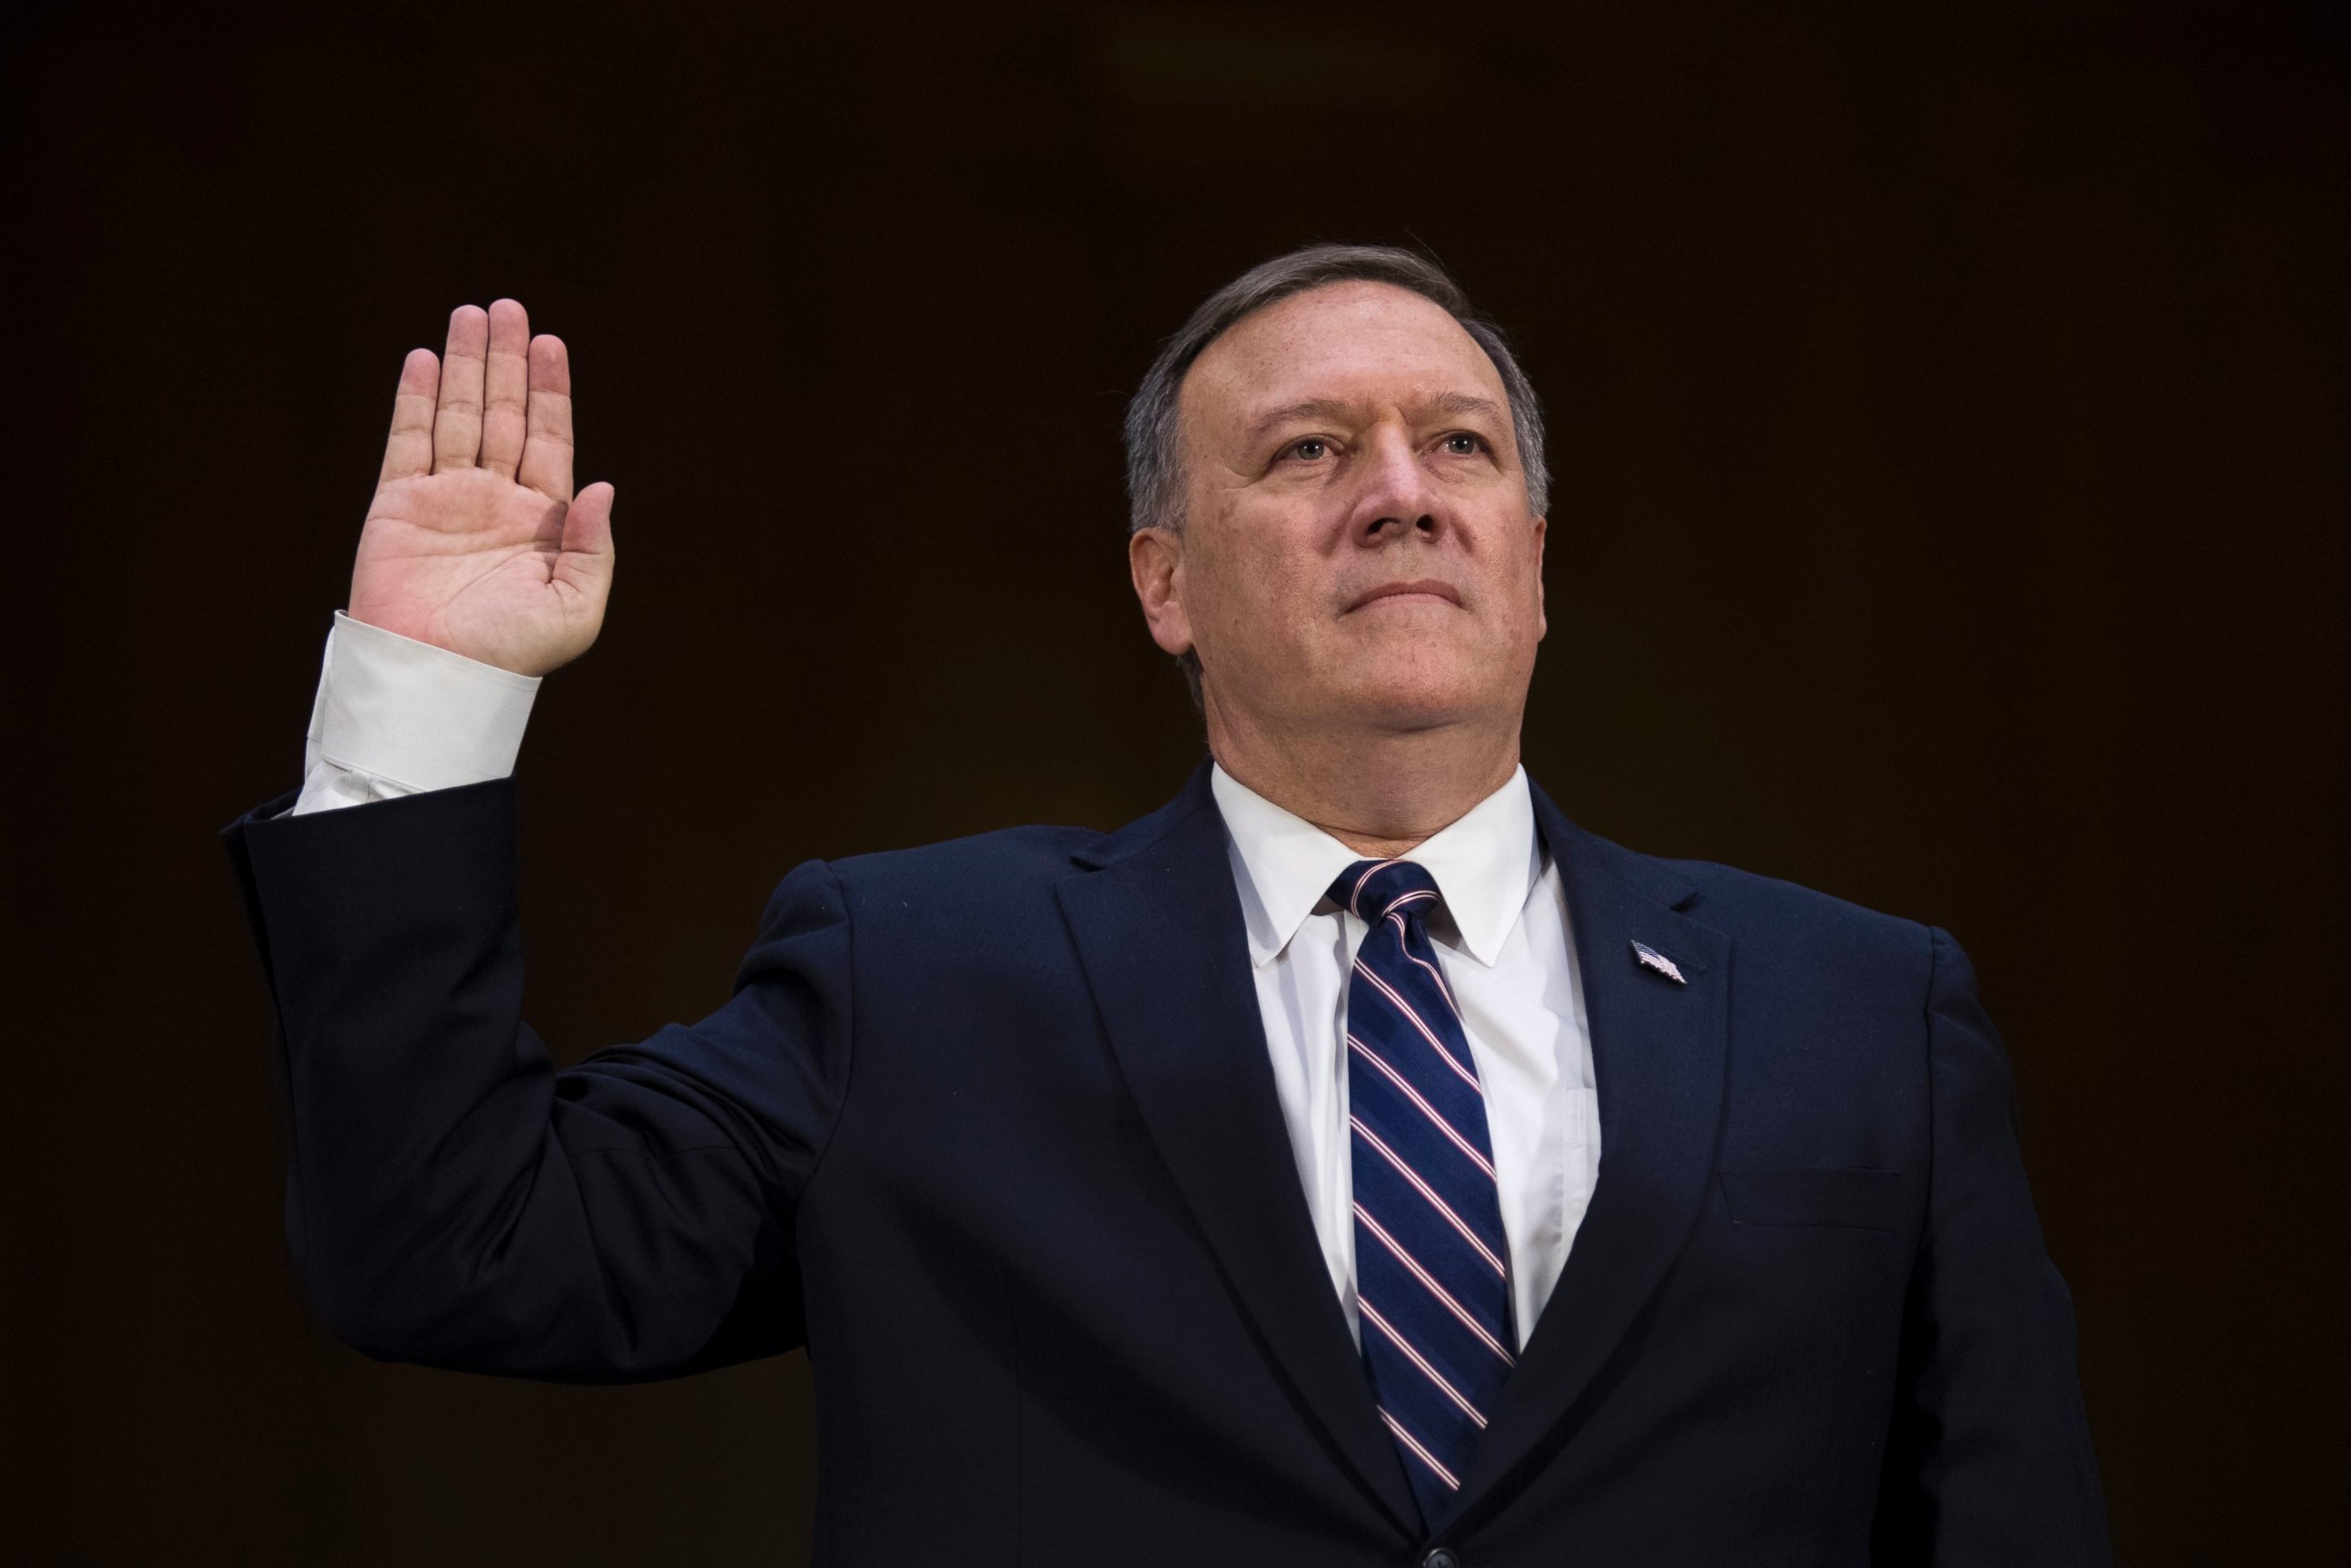 PHOTO: CIA Director nominee Congressman Michael Pompeo is sworn in prior to testifying during his confirmation hearing before Senate Intelligence Committee on Capitol Hill, Jan. 12, 2017.